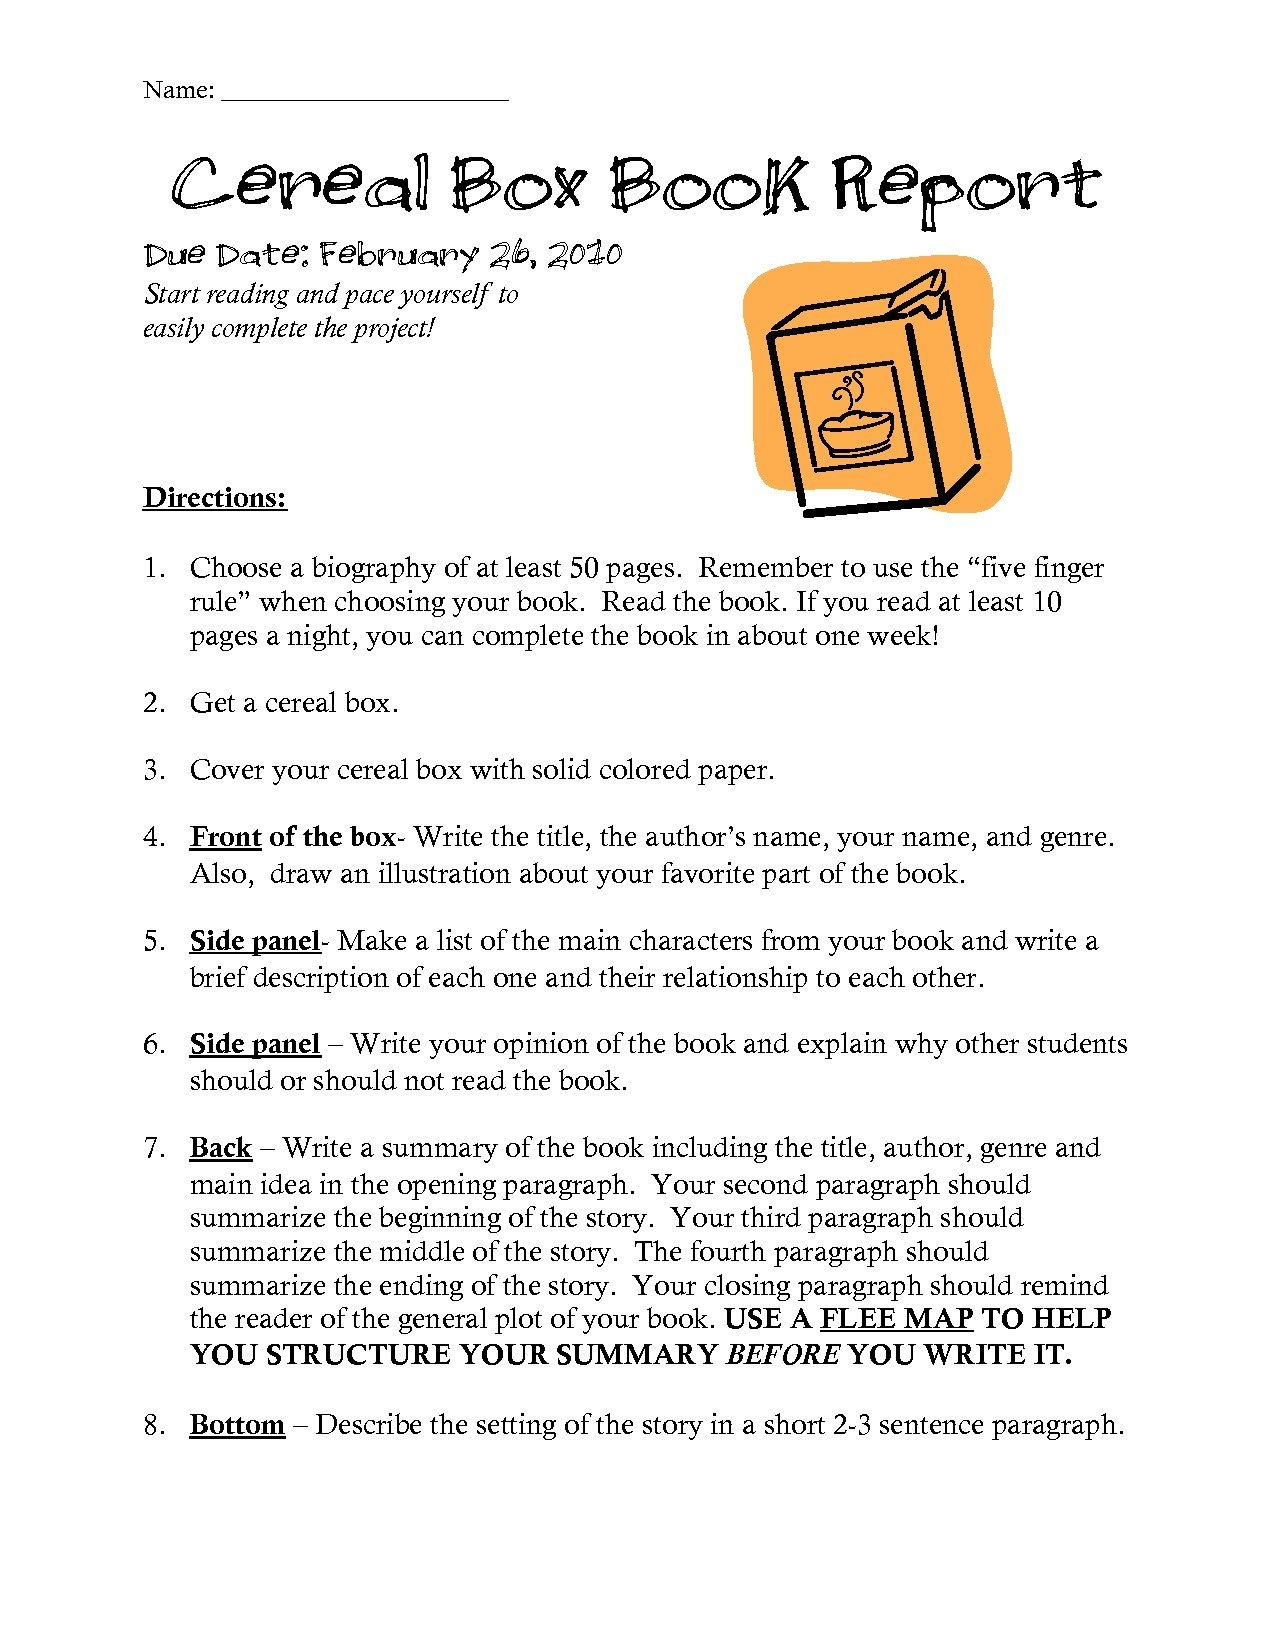 Cereal Box Book Report Templates  Resume Letter pertaining to Mobile Book Report Template